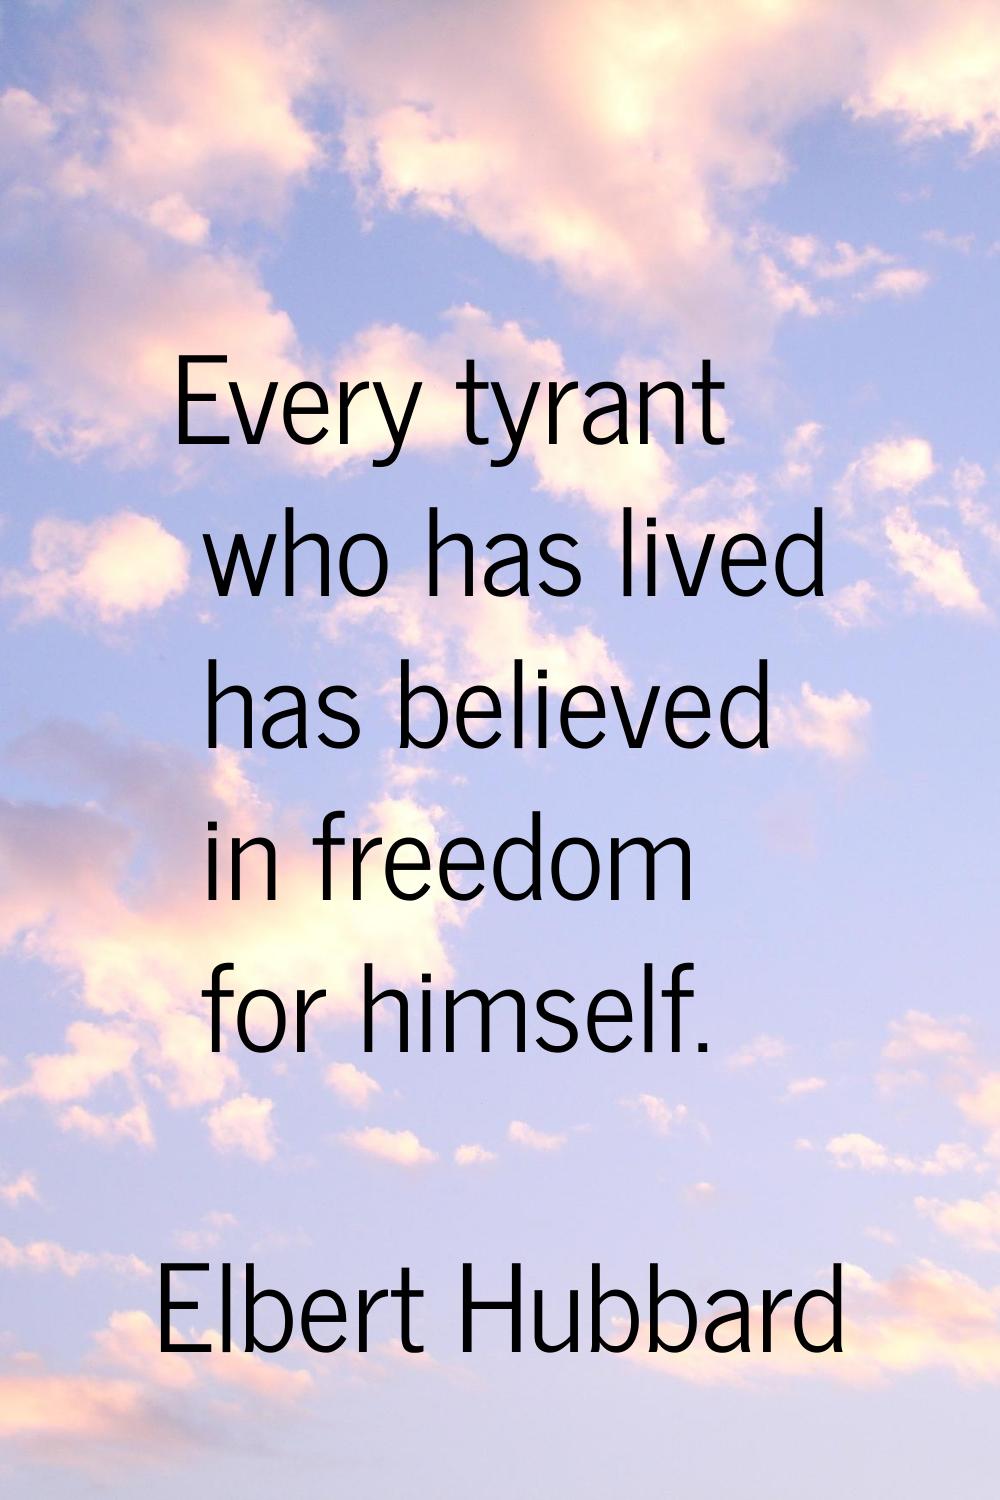 Every tyrant who has lived has believed in freedom for himself.